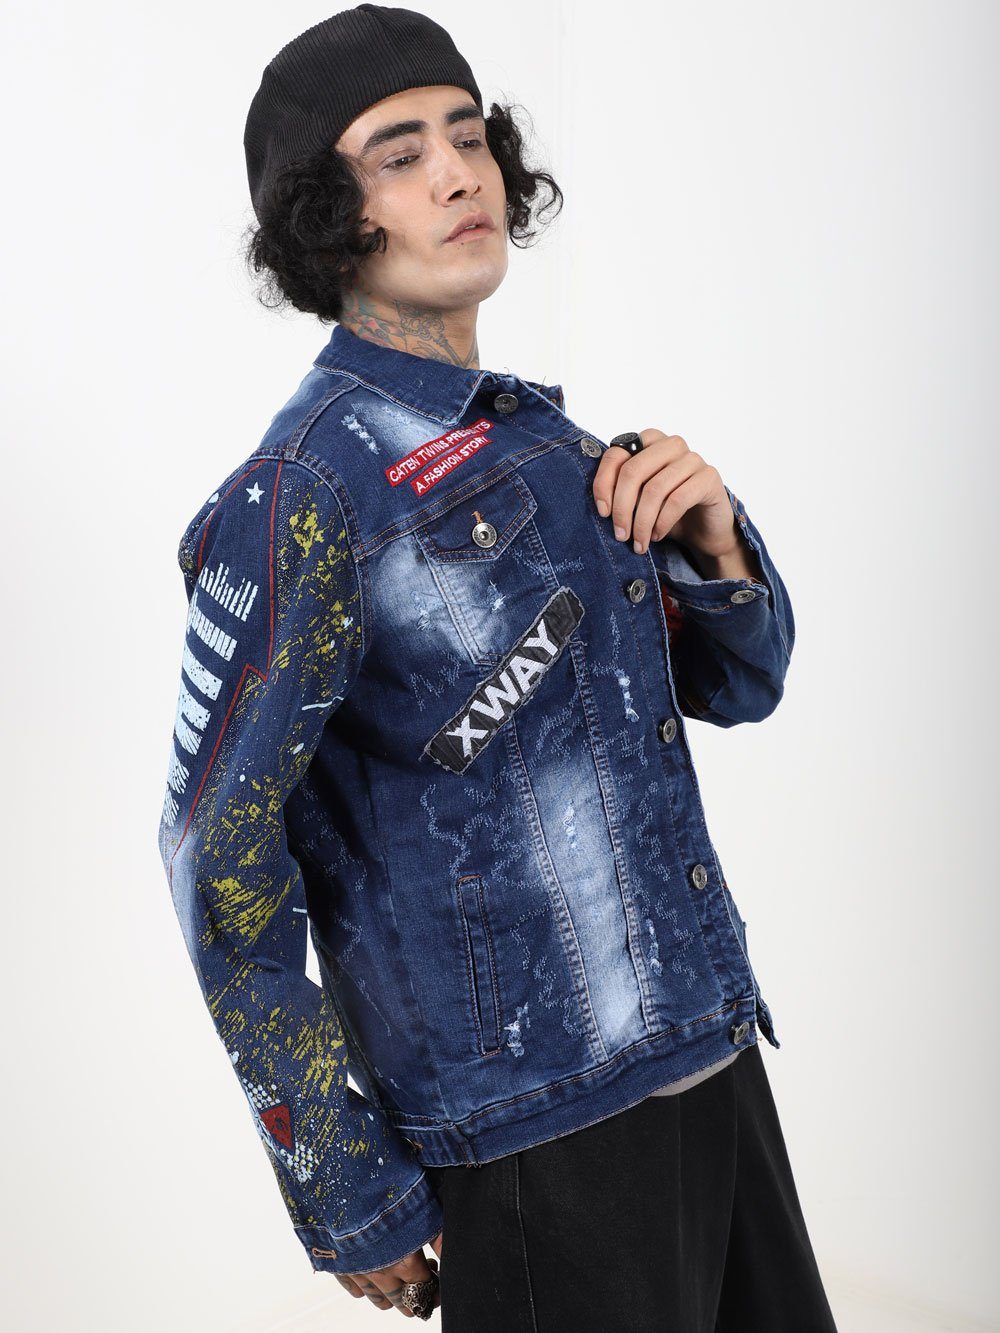 A man wearing an OLD PAINTING denim jacket with paint splatters on it.